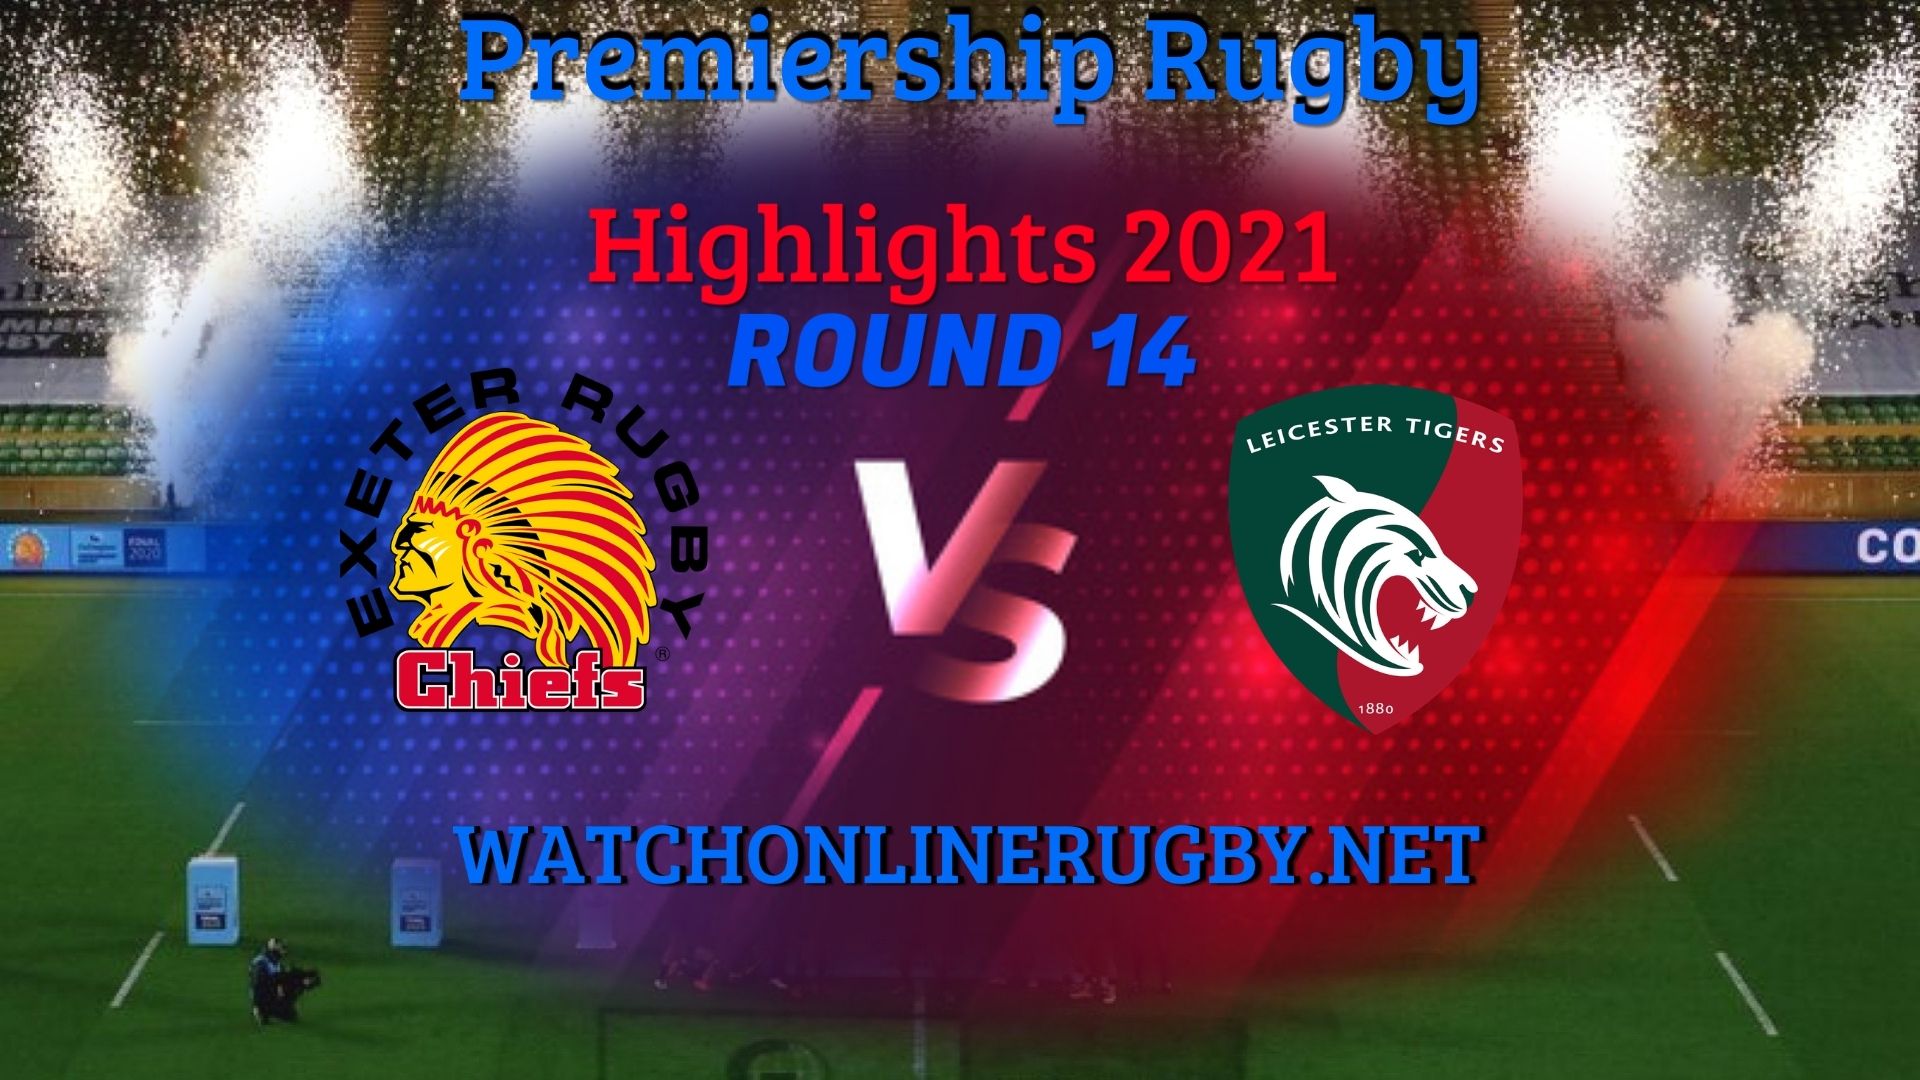 Exeter Chiefs Vs Leicester Tigers Premiership Rugby 2021 RD 14